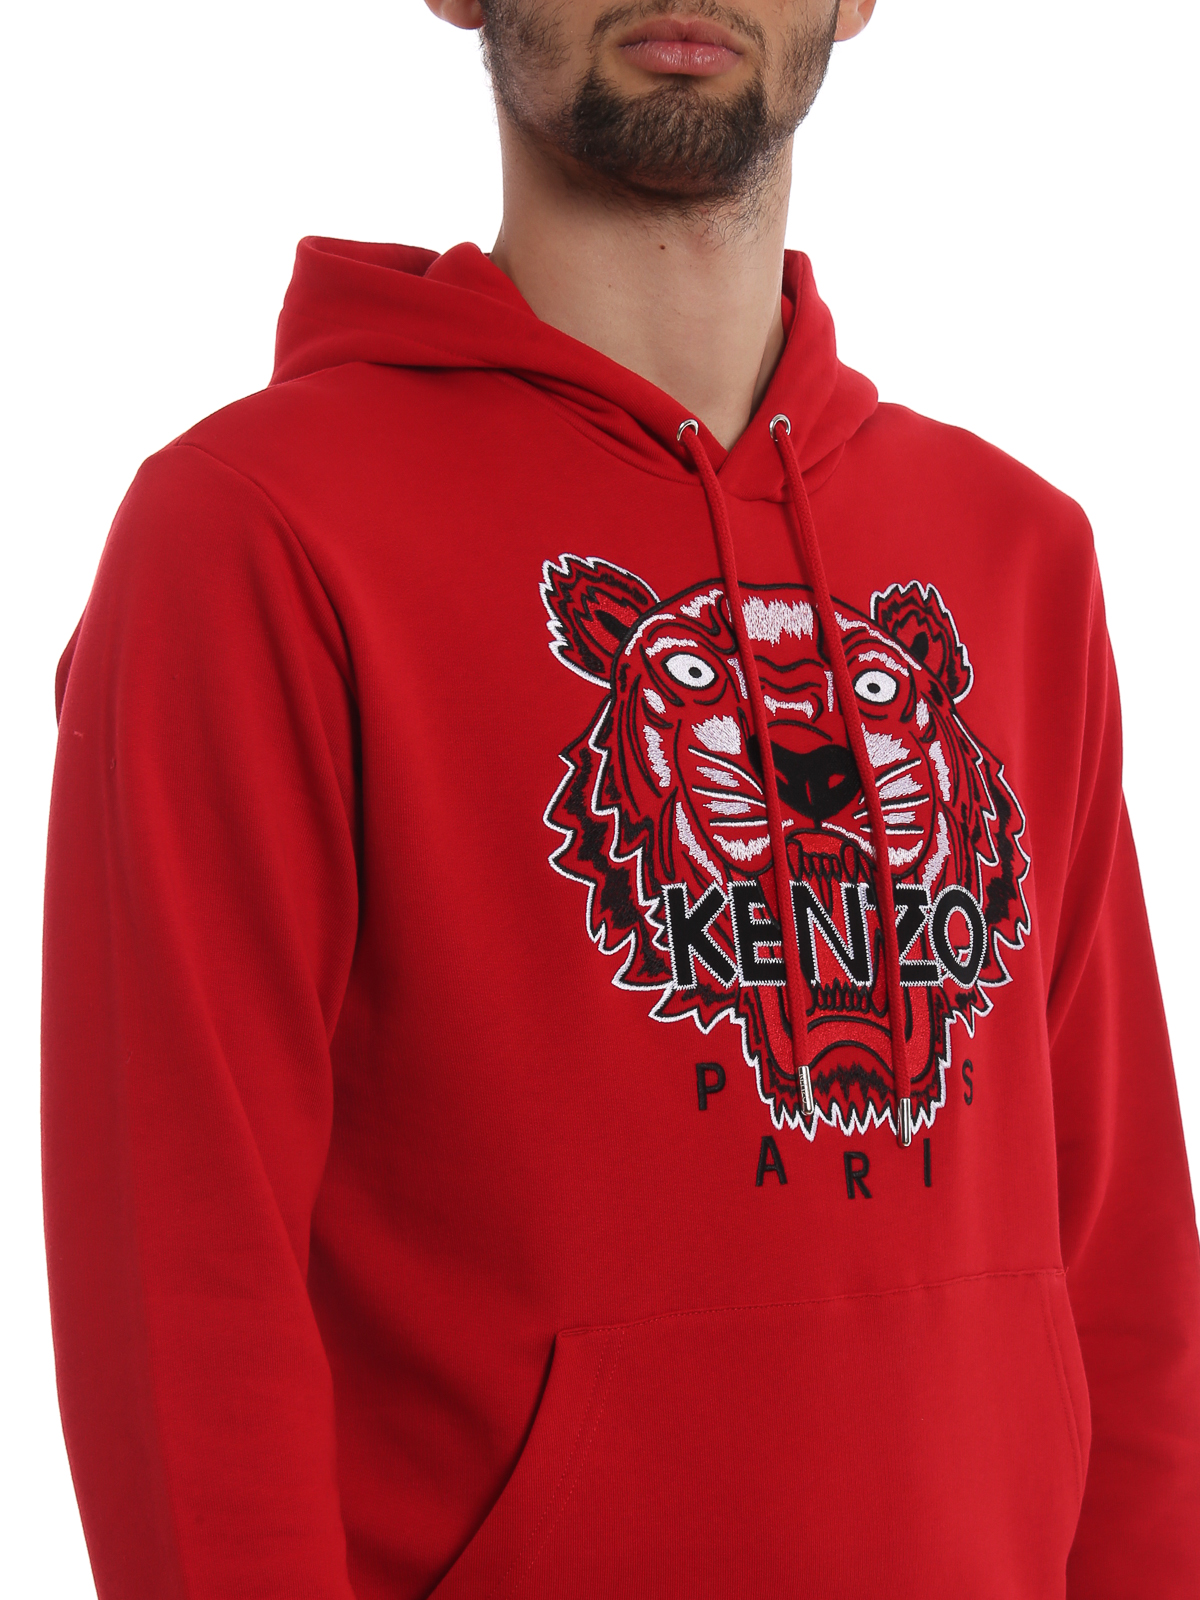 kenzo tiger red